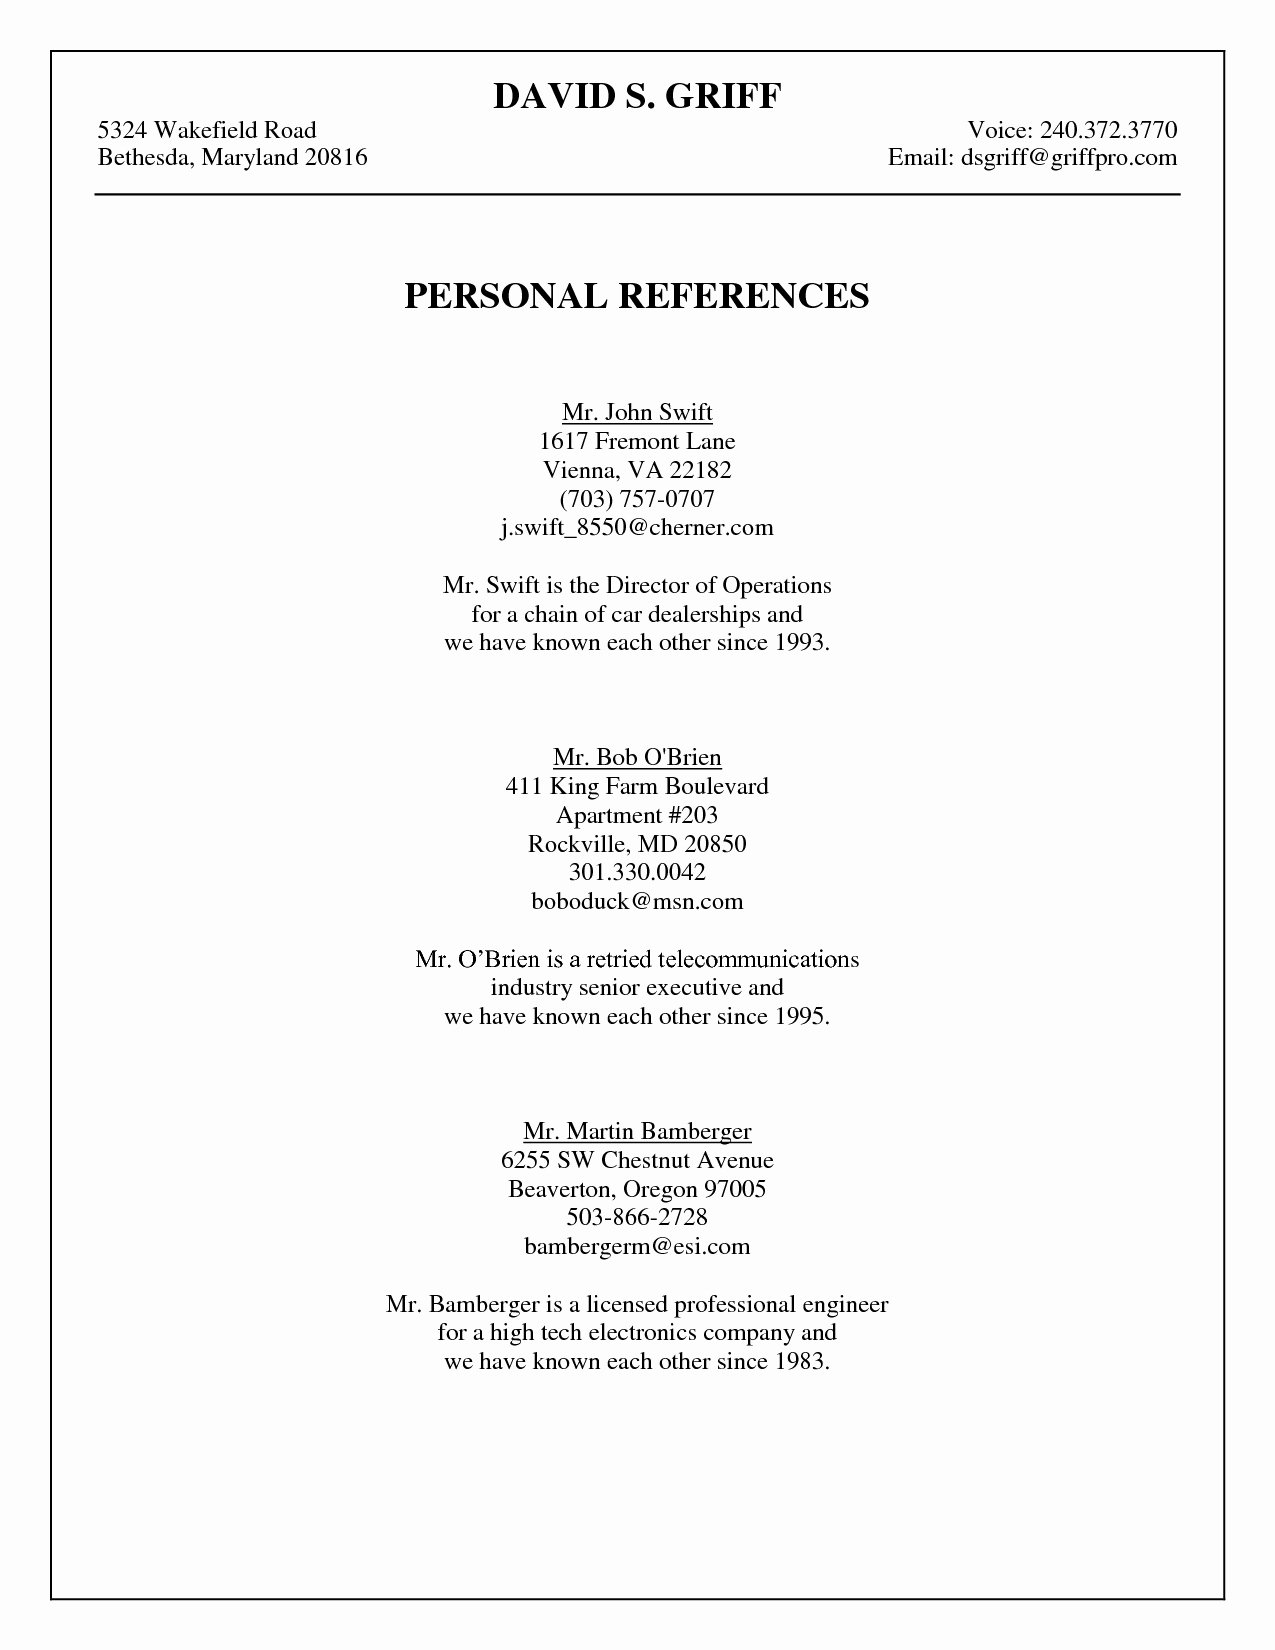 Job Reference Page Template Bibliography Generator Should